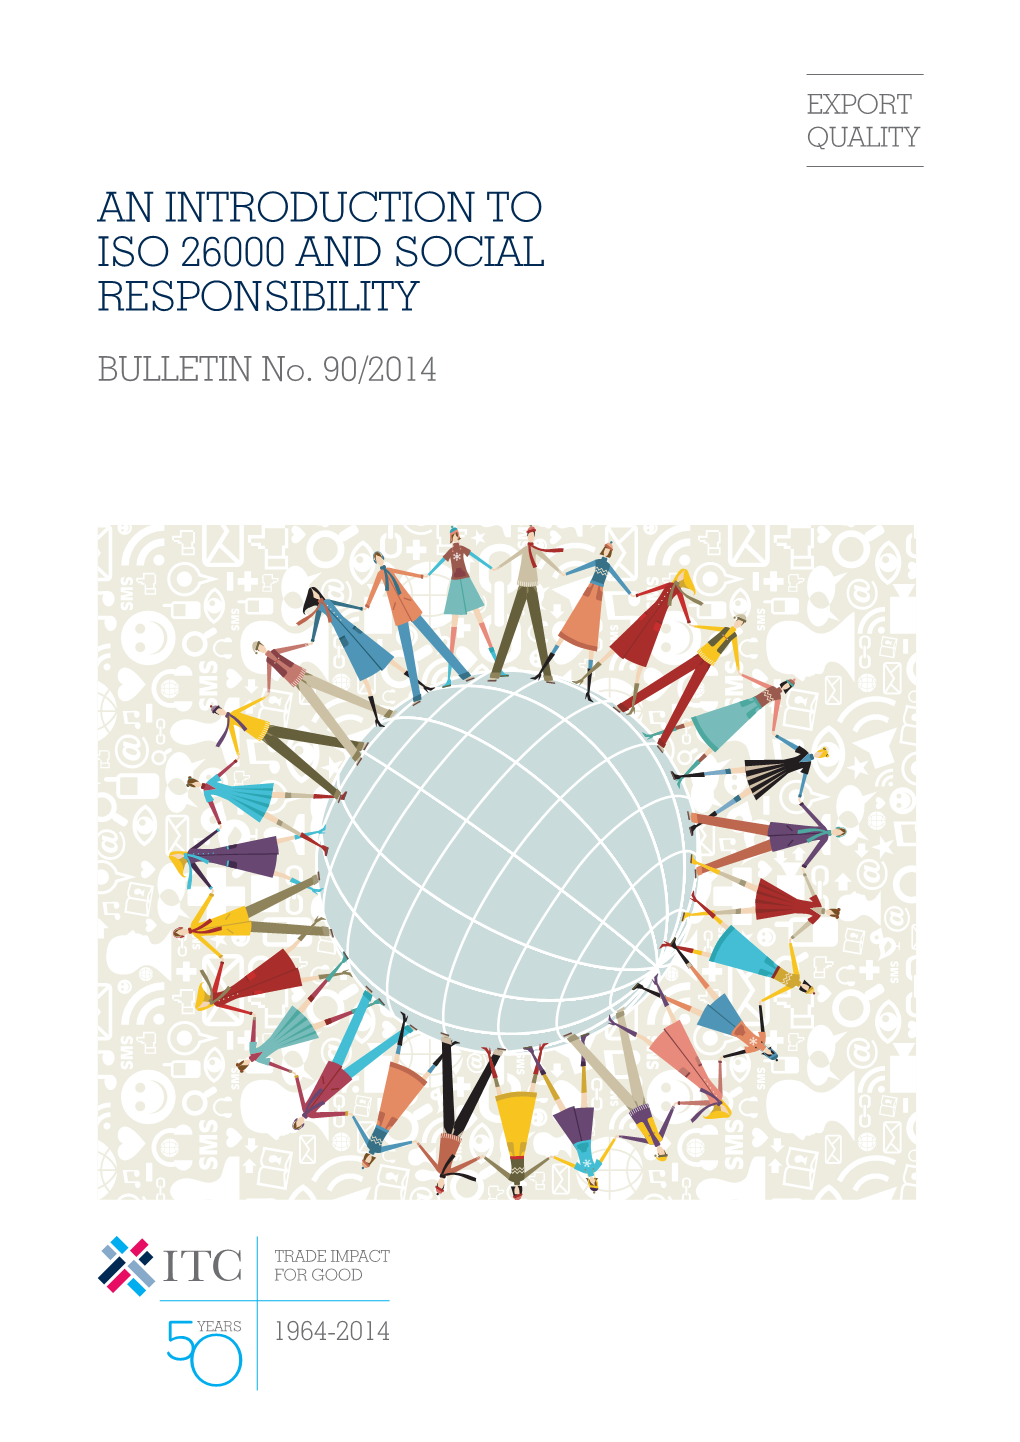 An Introduction to Iso 26000 and Social Responsibility